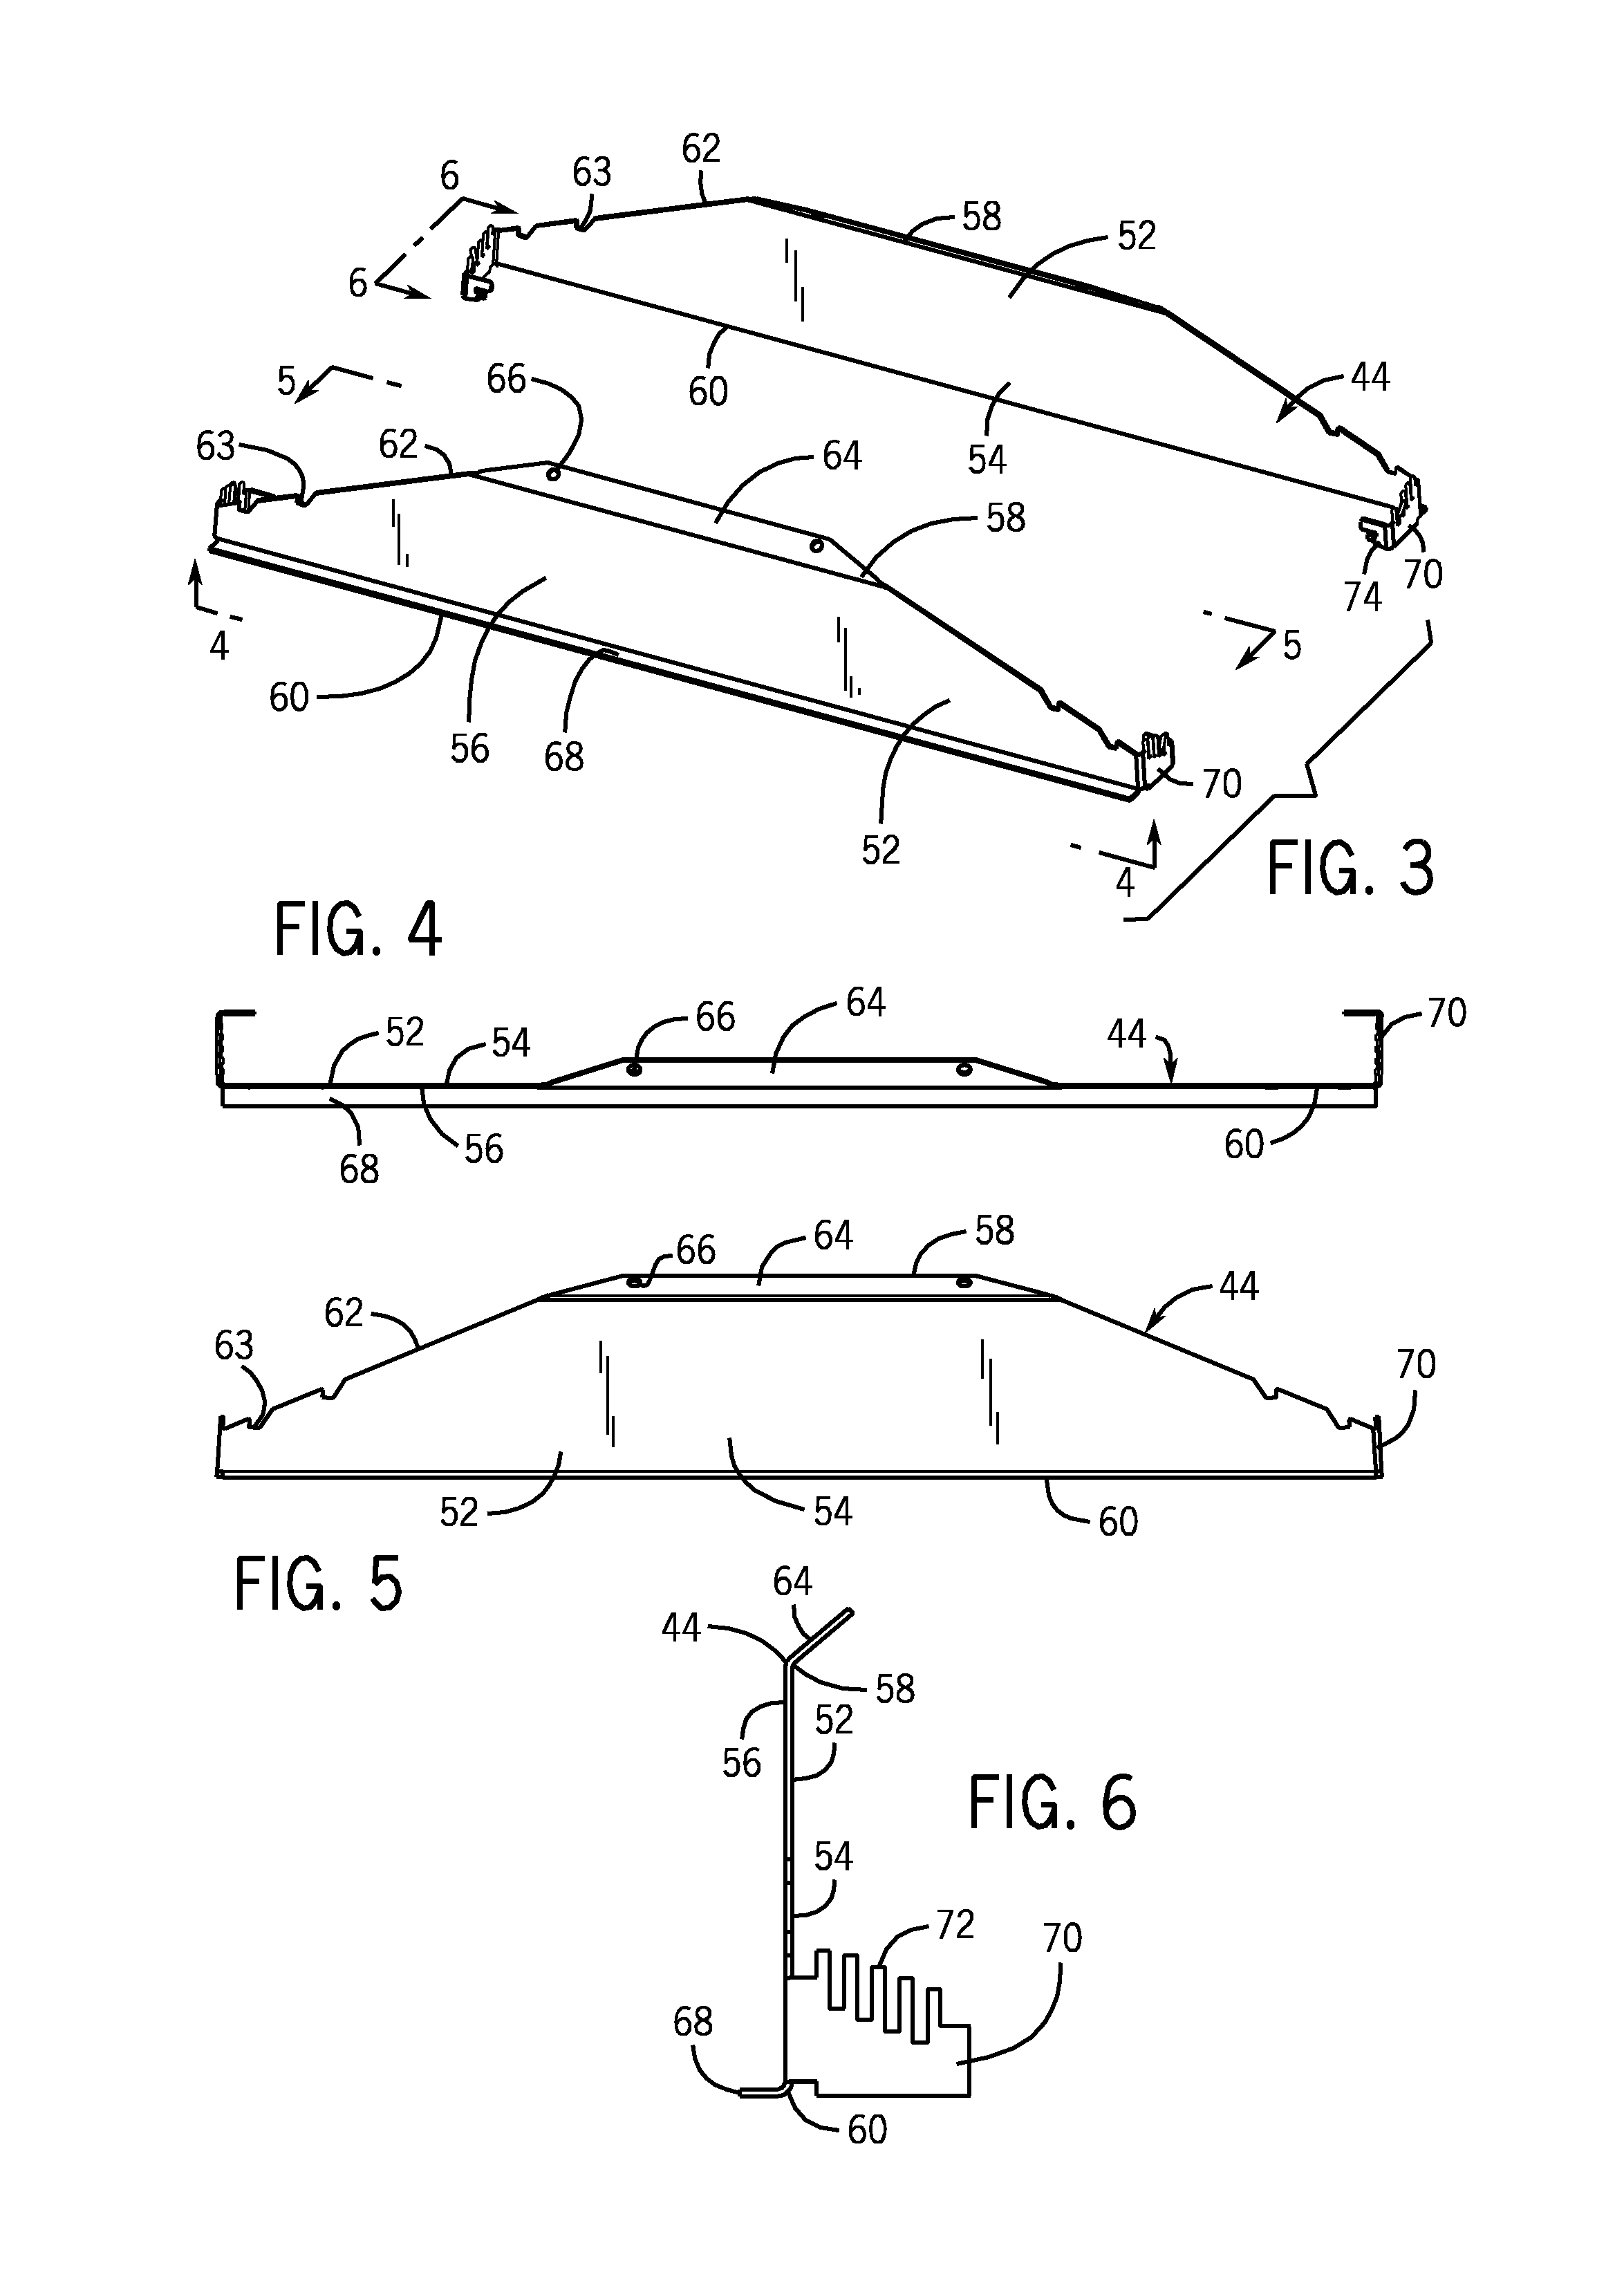 Lighting fixture housing for suspended ceilings and method of installing same